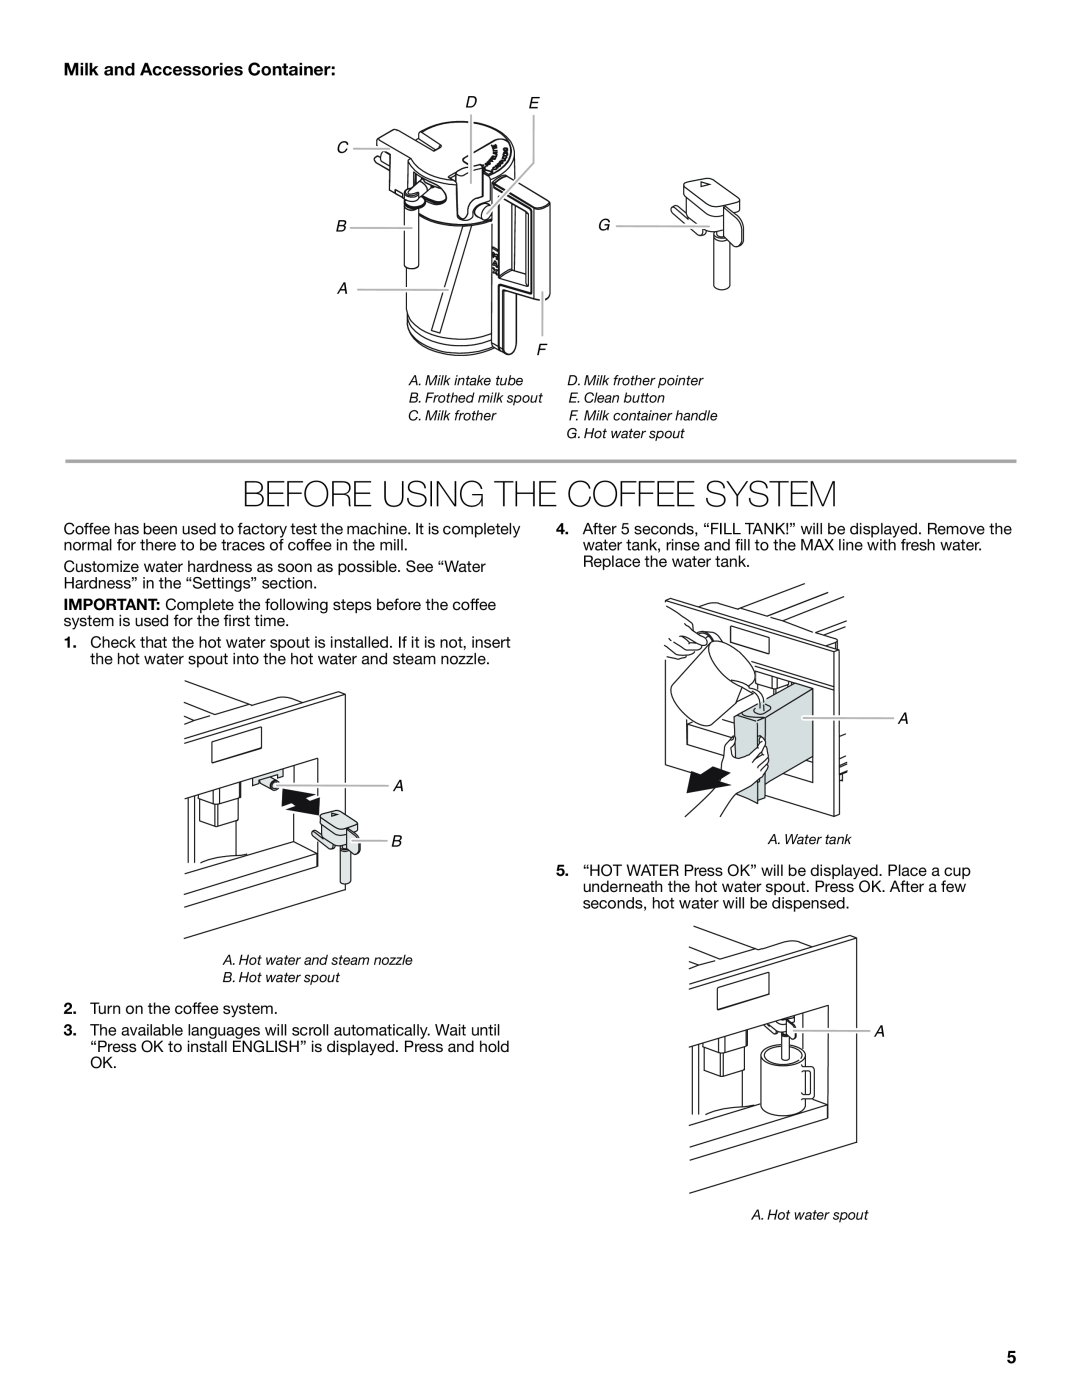 Jenn-Air JBC7624BS manual Before Using The Coffee System, Milk and Accessories Container, D E C B A F 